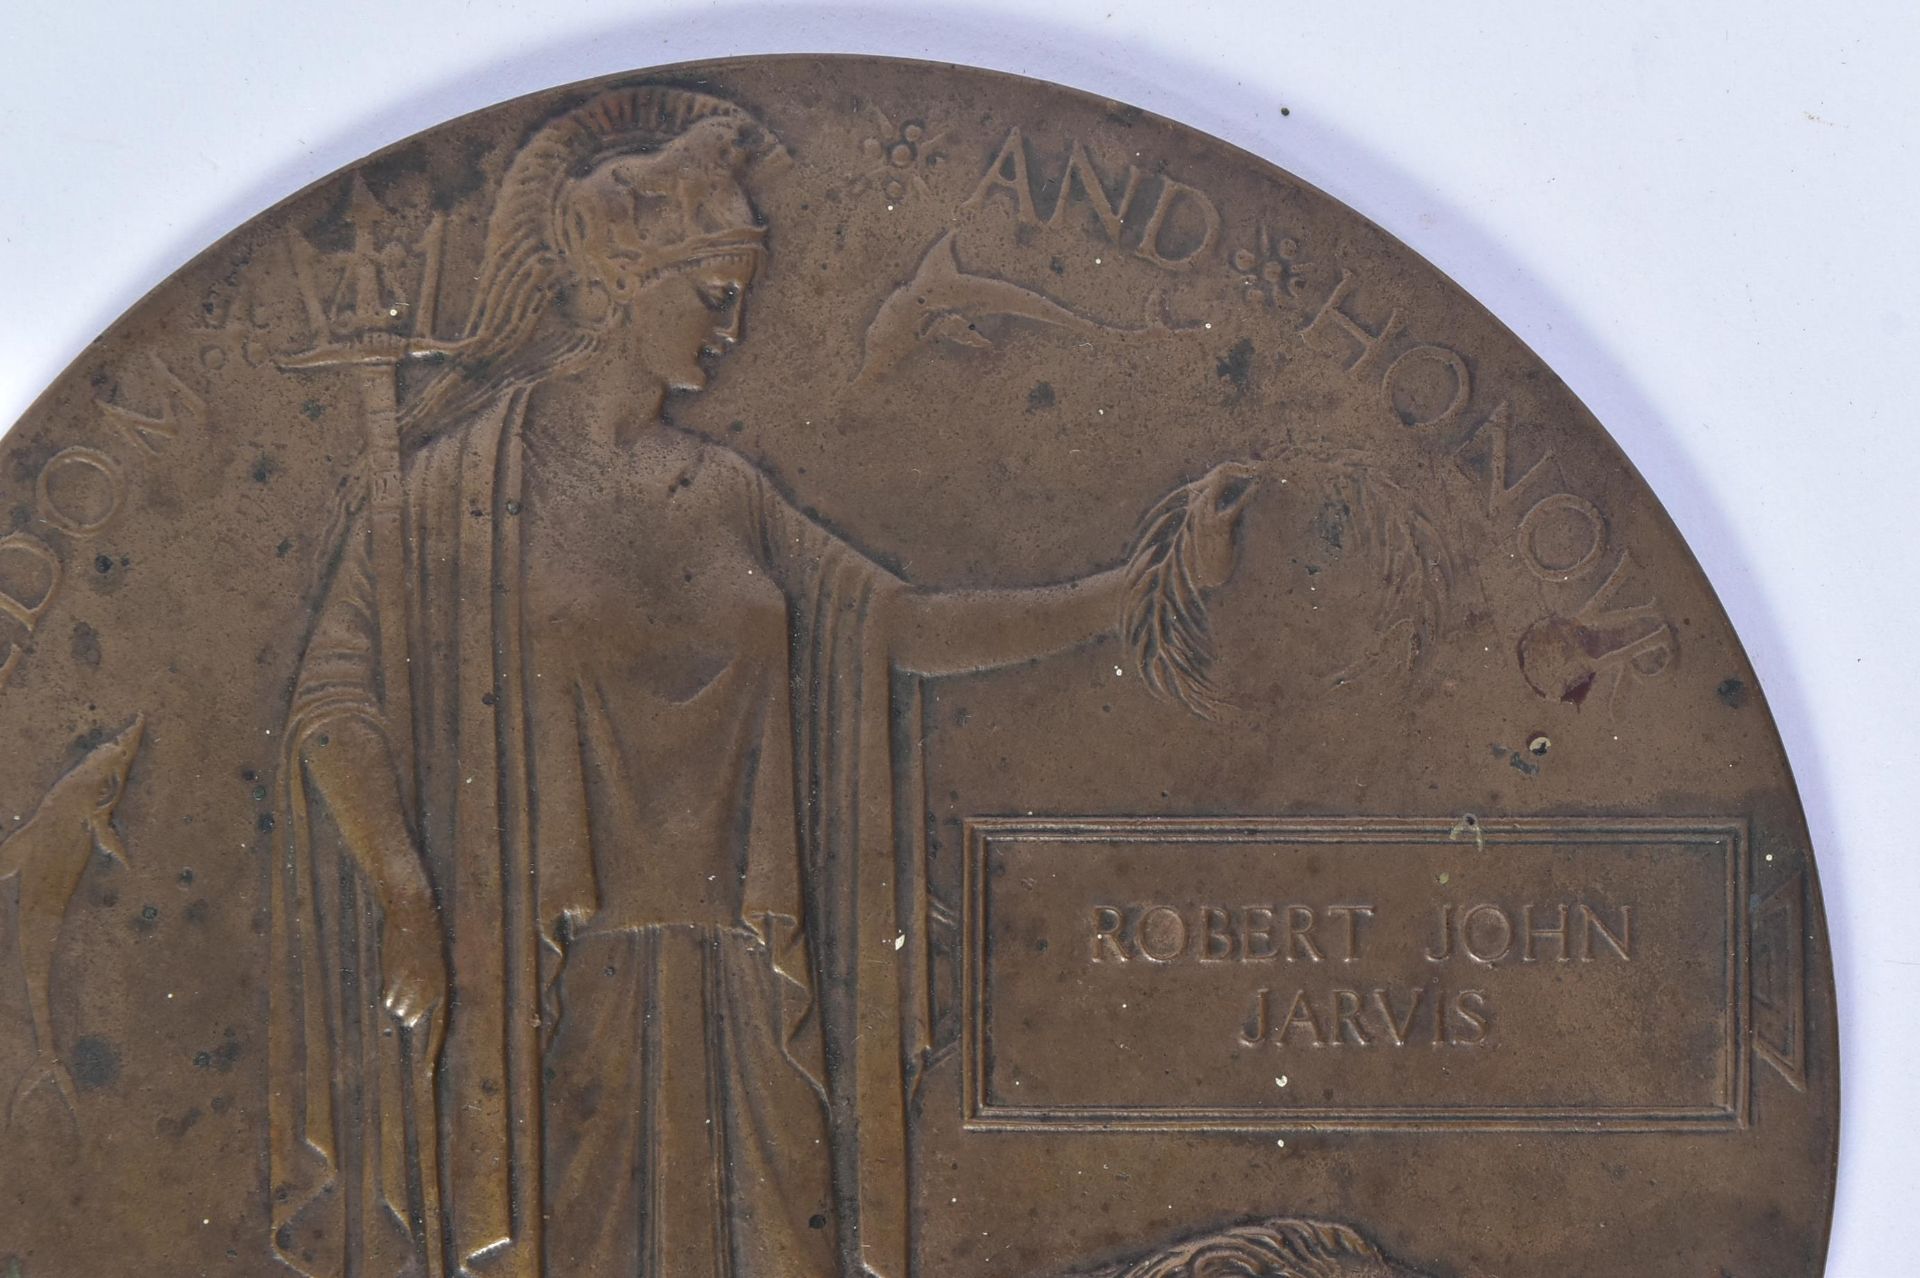 WWI FIRST WORLD WAR DEATH MEMORIAL PLAQUE MEDAL - Image 3 of 5